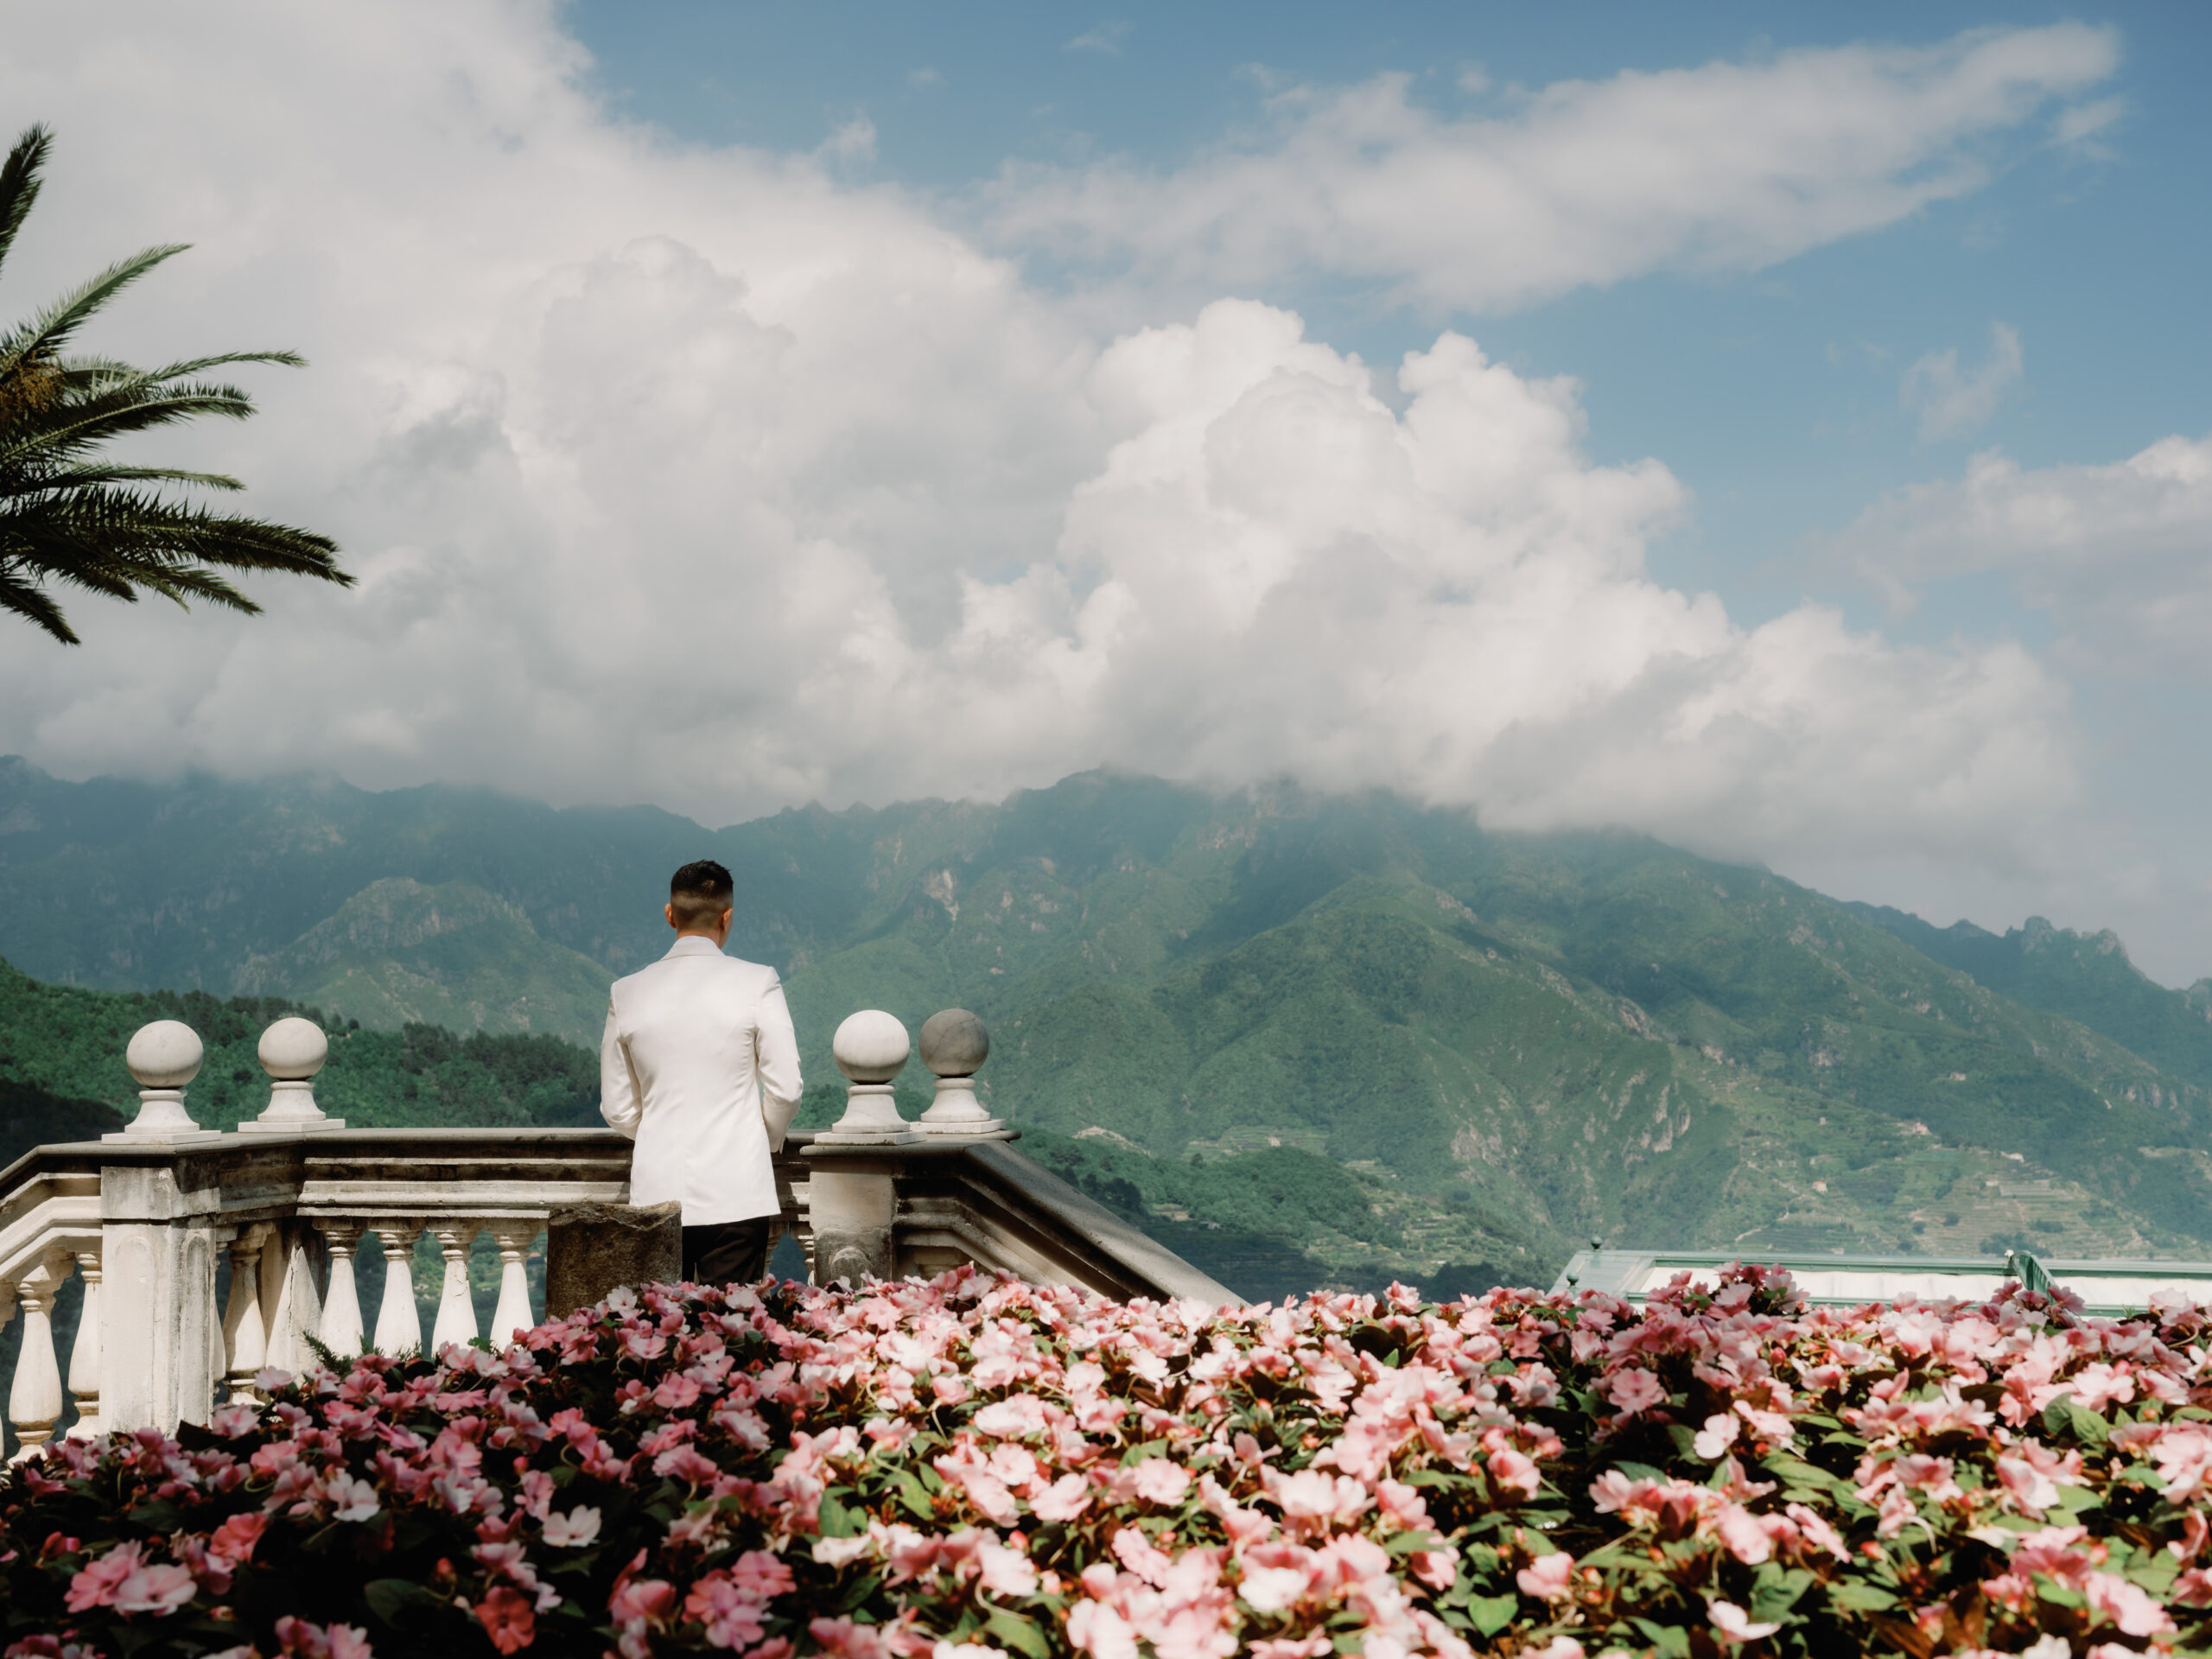 First look image of the groom overlooking mountain views for a wedding in Italy. Image by Jenny Fu Studio